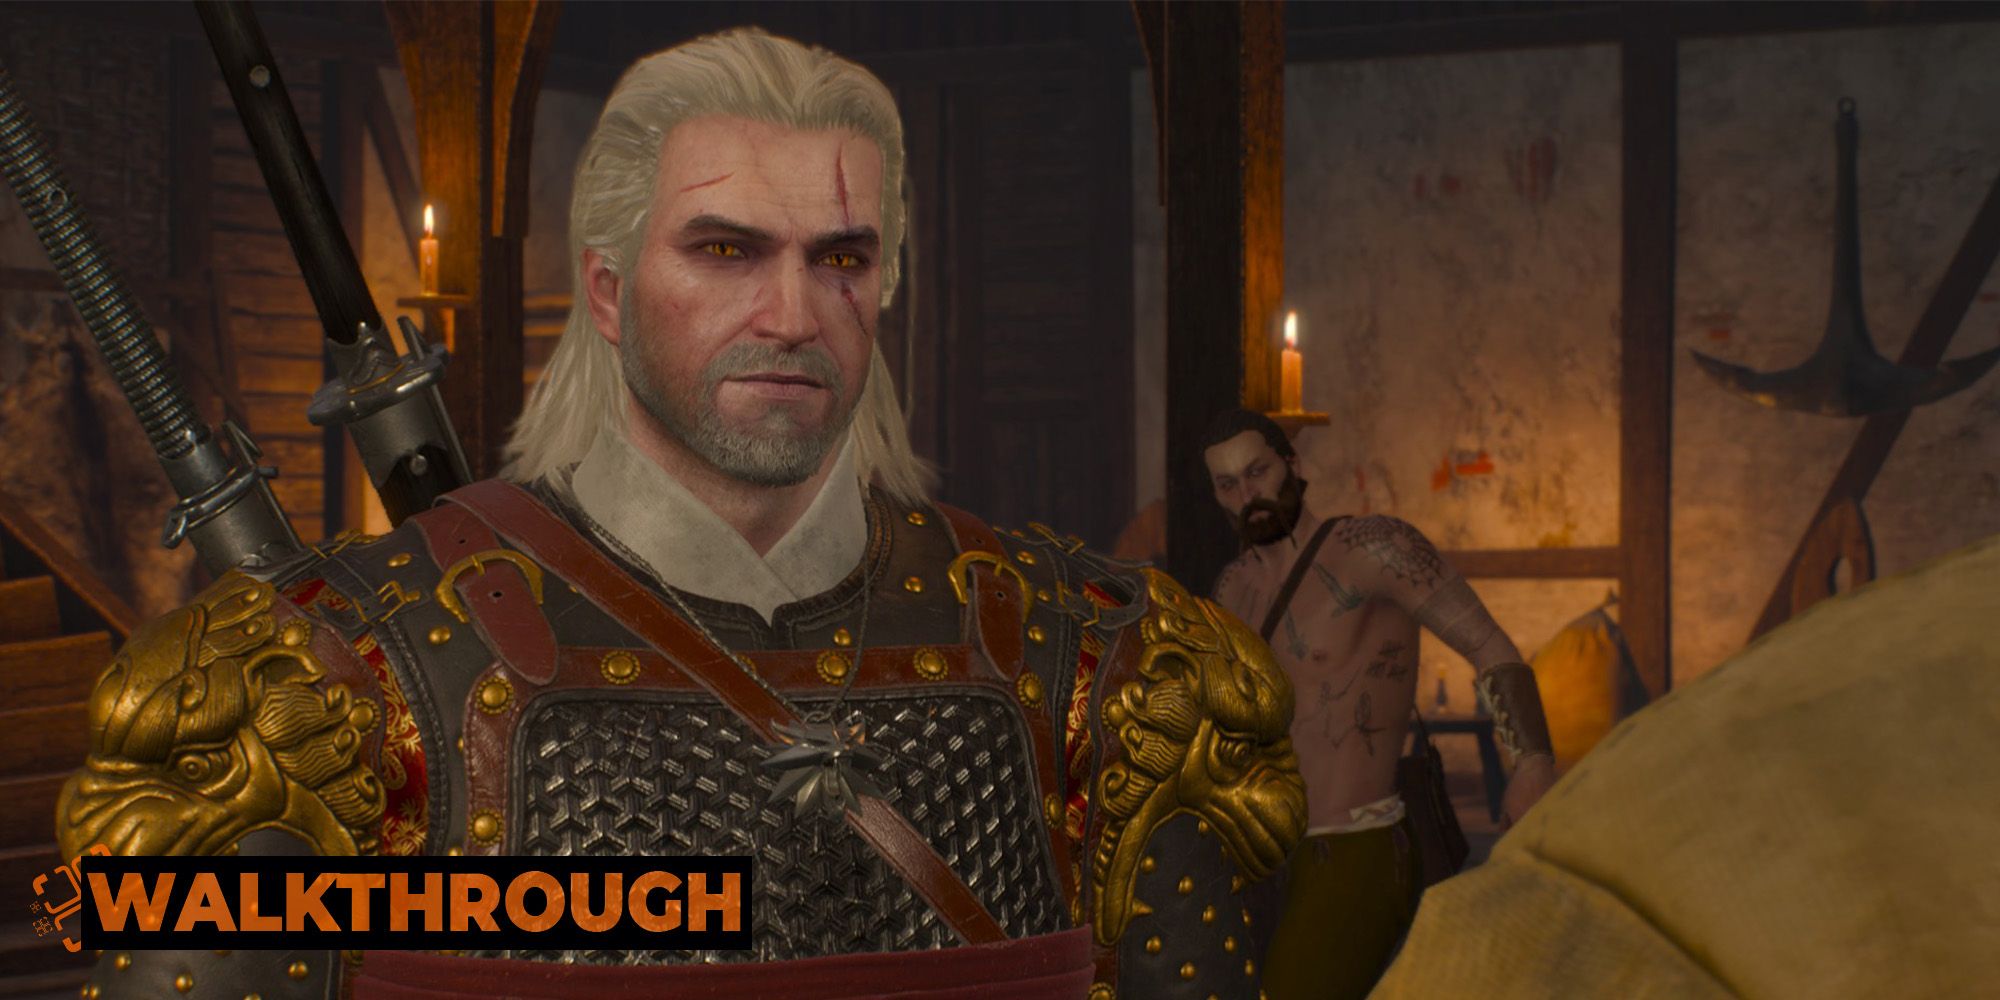 Geralt, wearing ornate red and gold armor, looks angrily at a man wearing yellow in The Witcher 3.